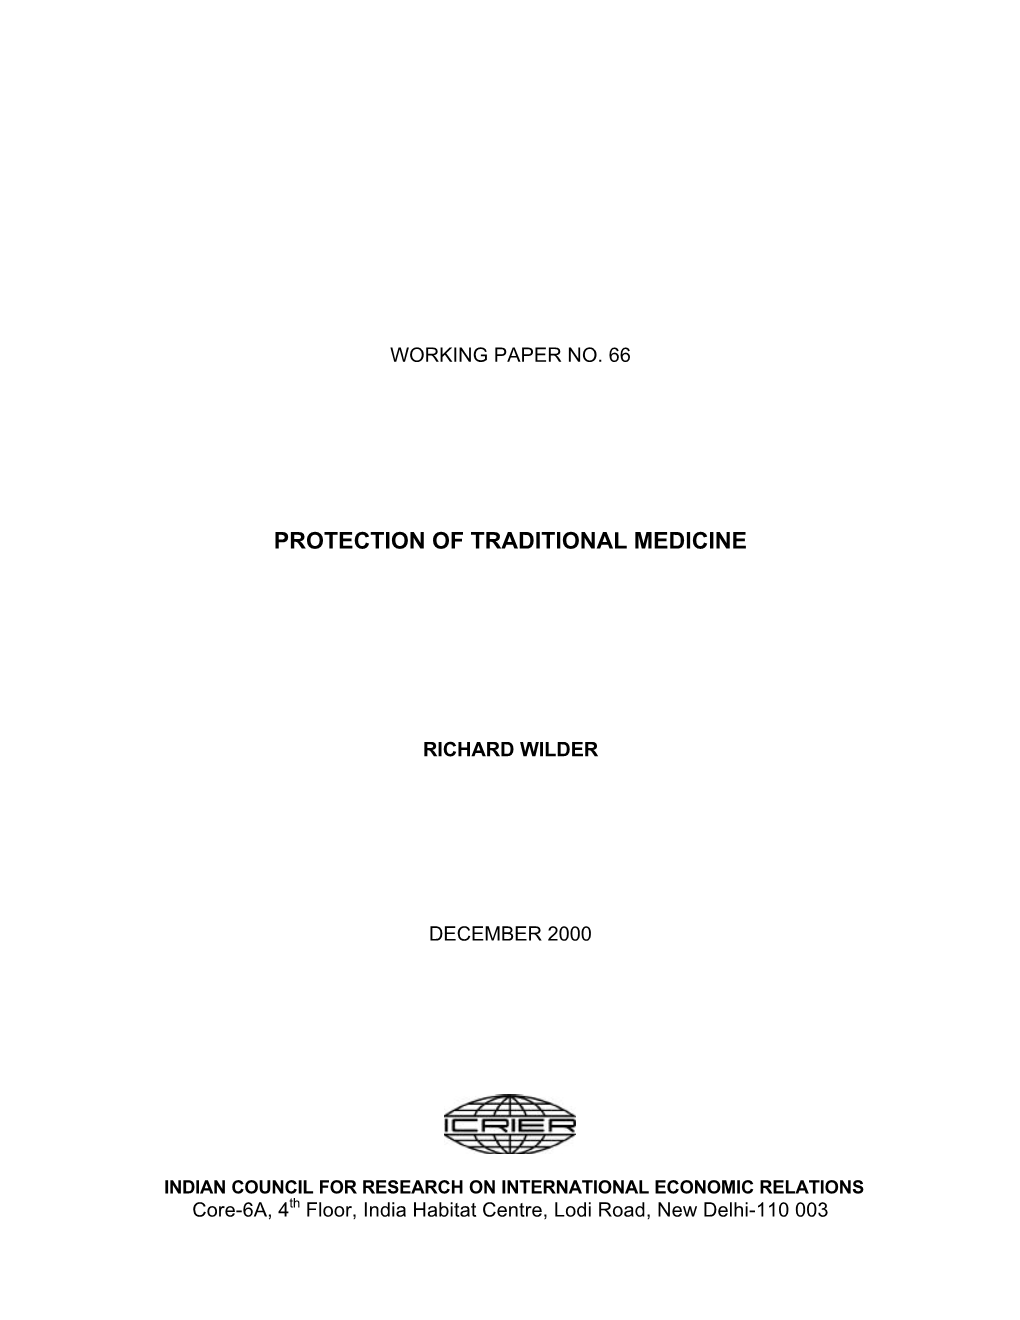 Protection of Traditional Medicine